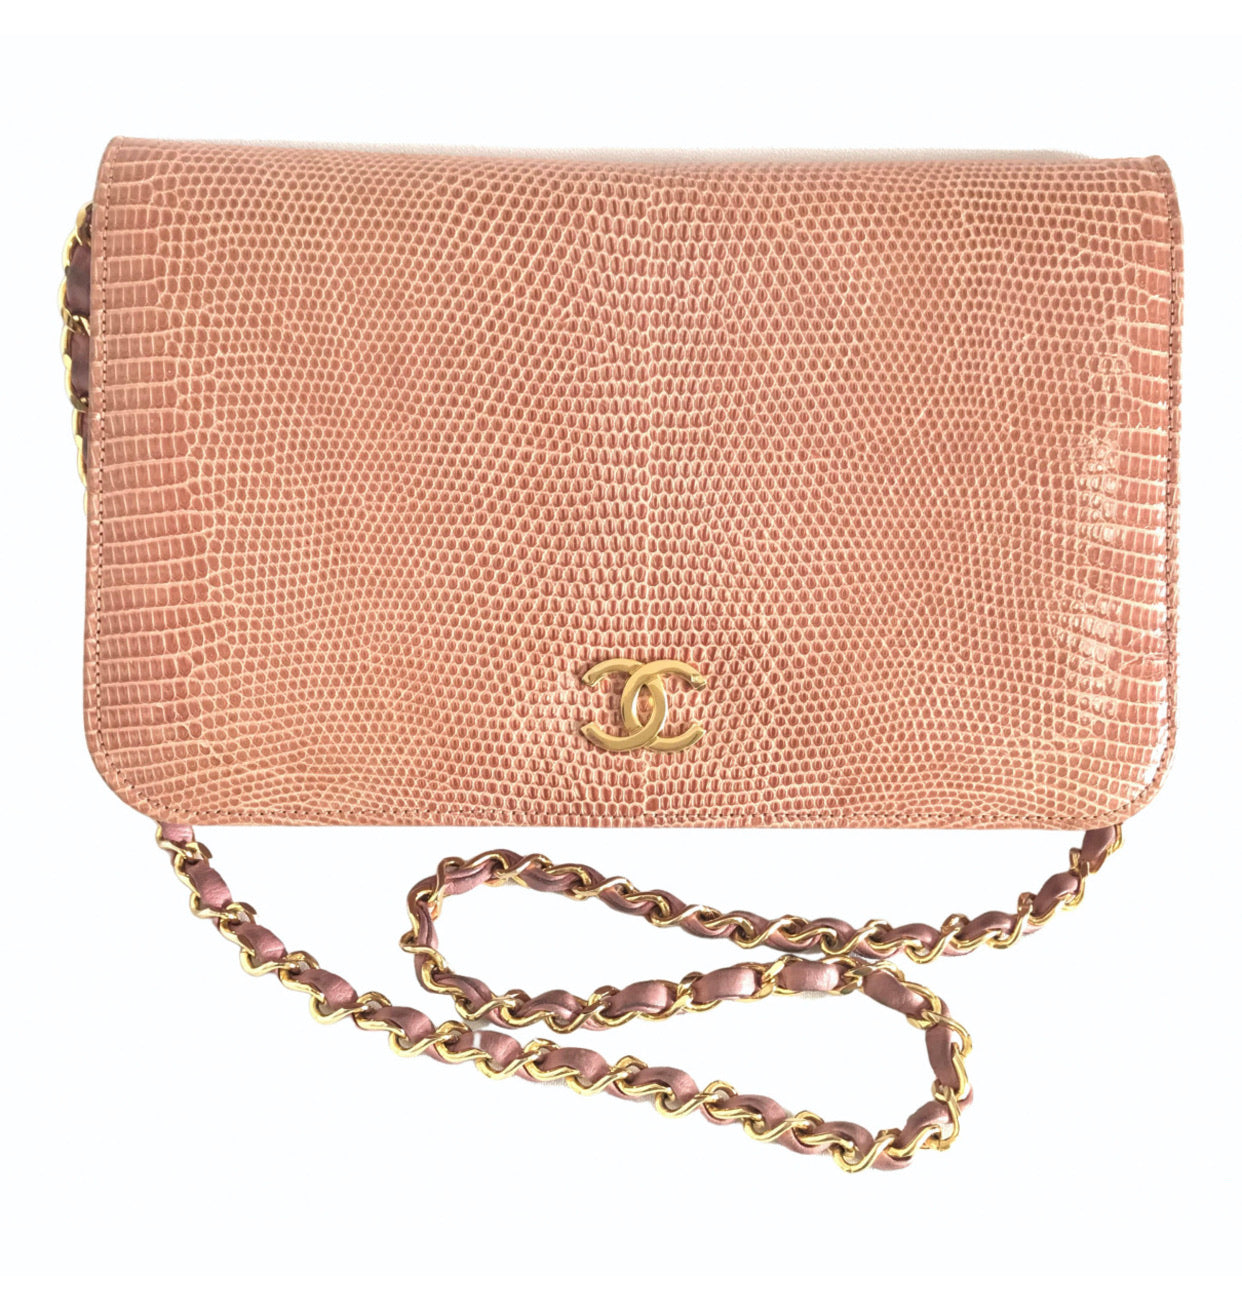 Vintage CHANEL milky pink genuine lizard leather 2.55 shoulder bag with golden CC mark and and chain strap. Rare masterpiece.